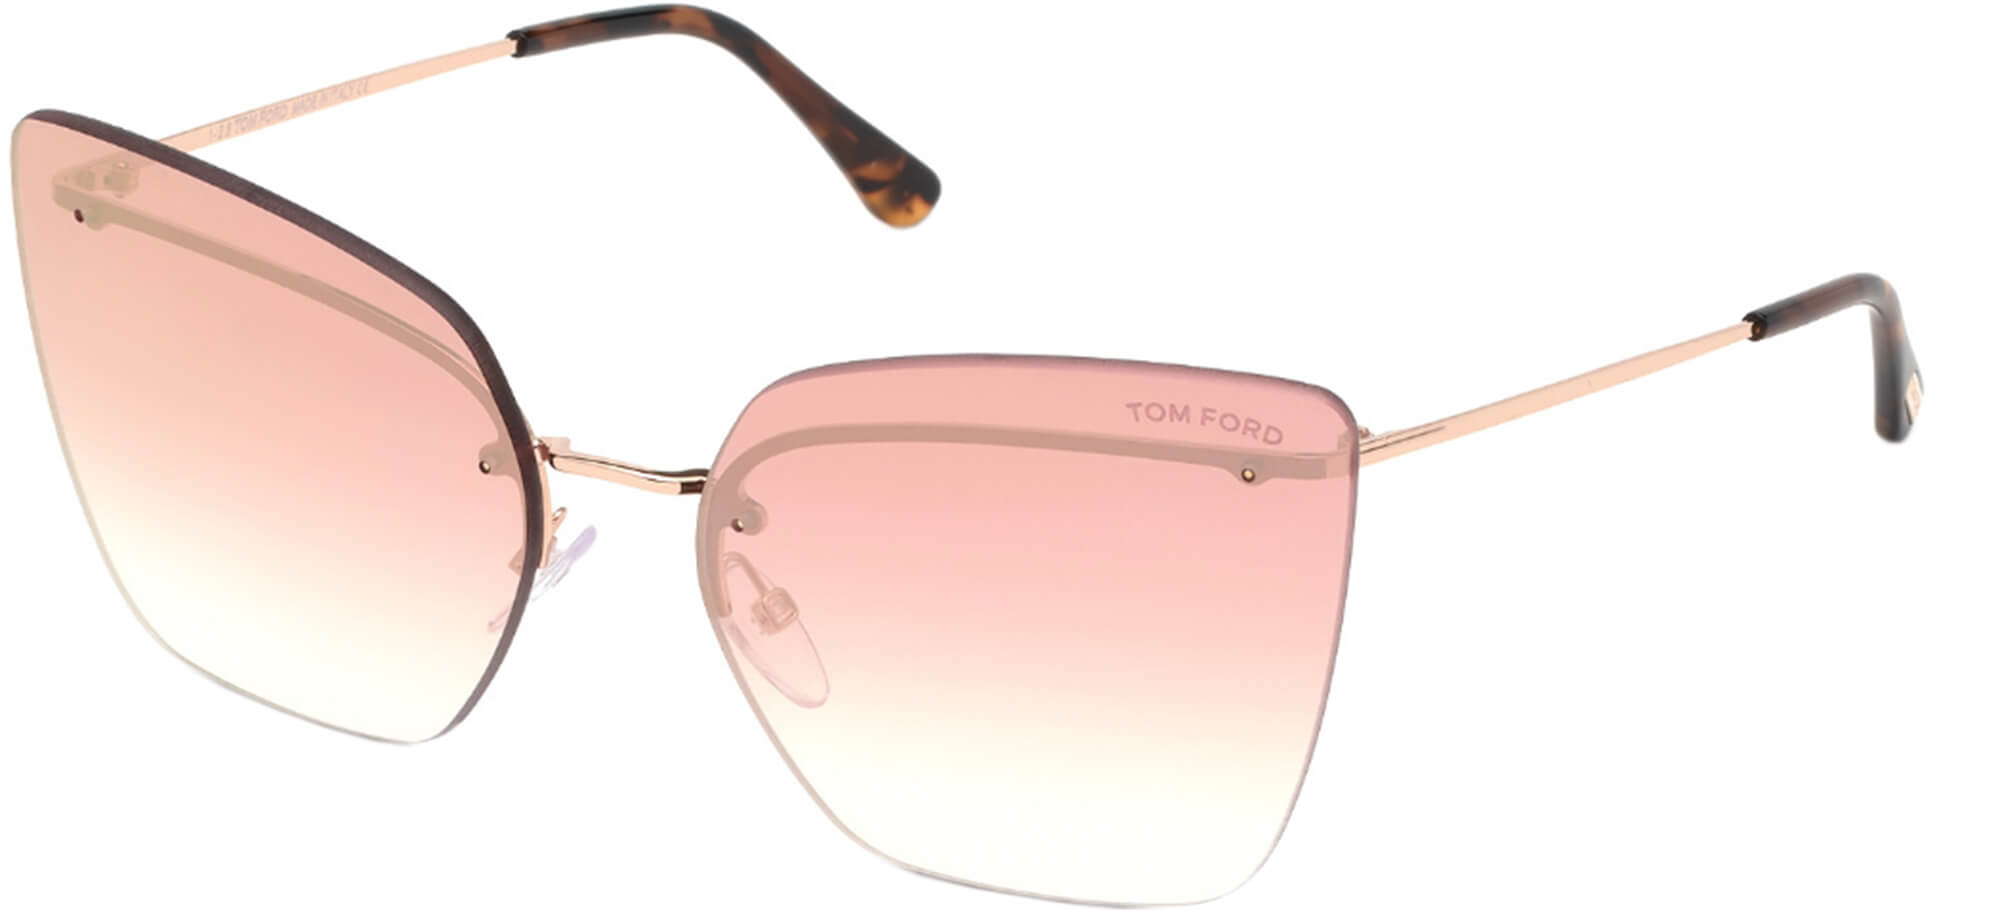 Tom FordCAMILLA-02 FT 0682Rose Gold/brown Shaded (33G B)